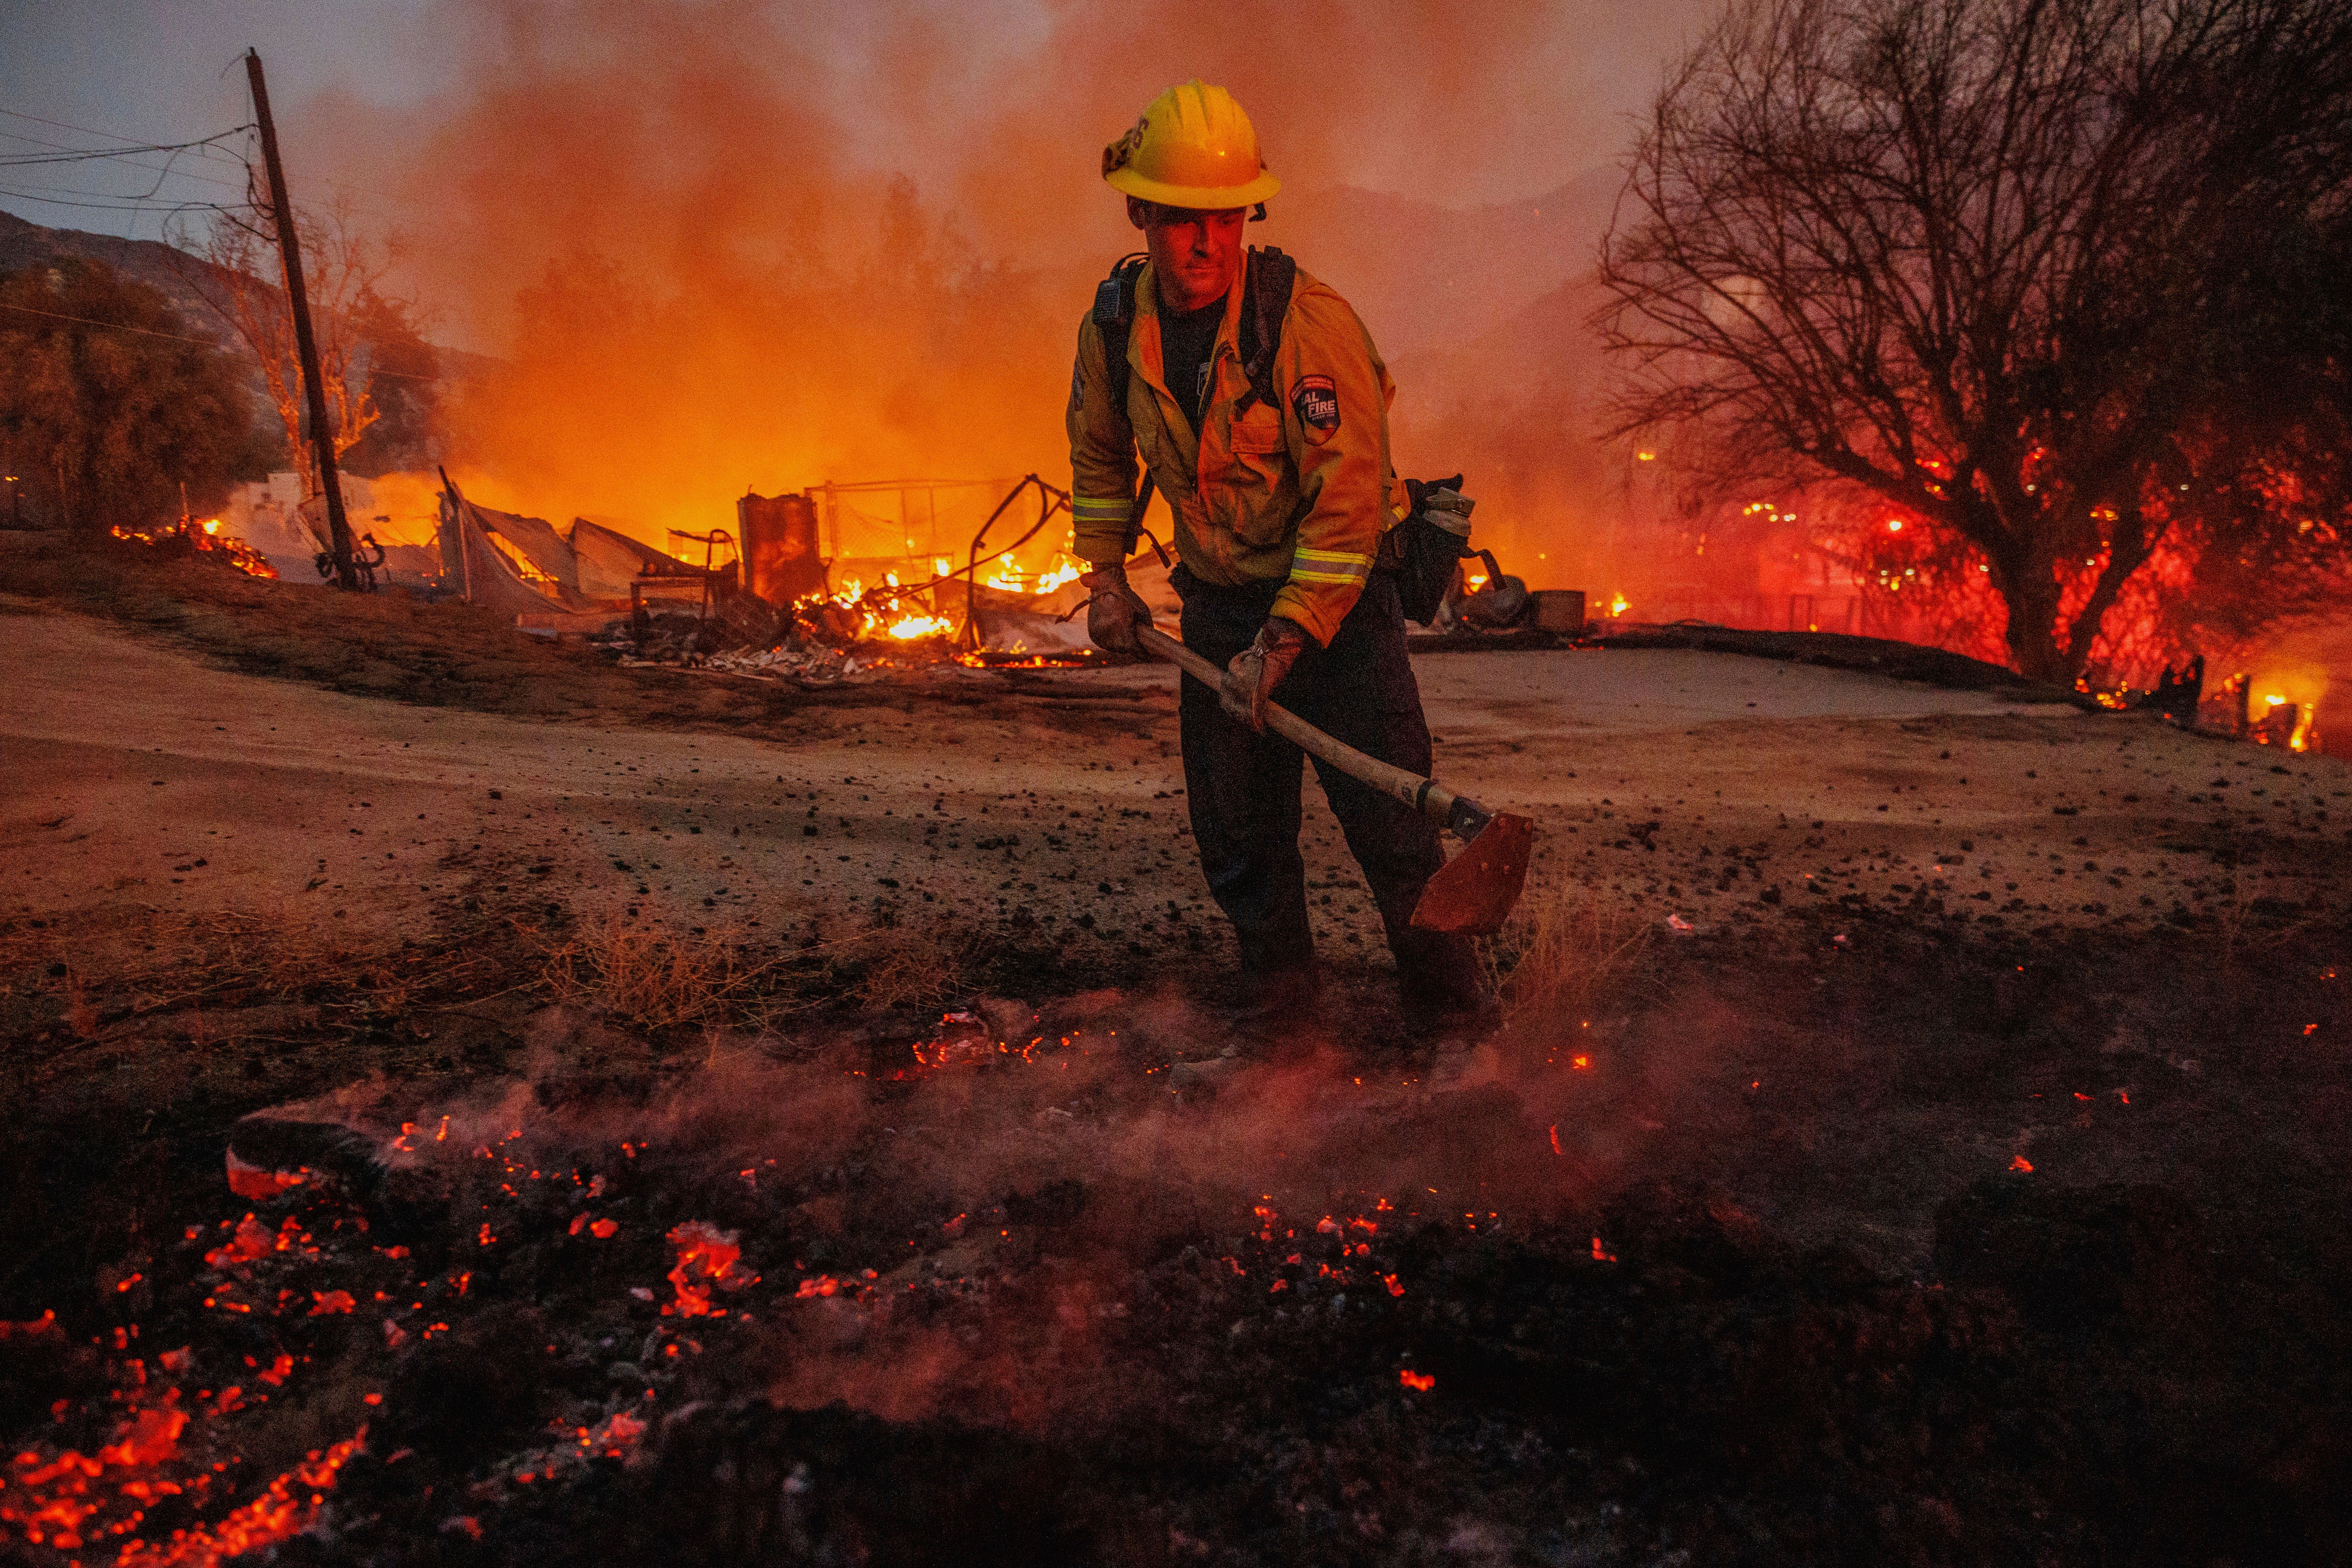 Ian Fremd, of the Beaumont Fire Department, takes down hot spots while battling the Fairview Fire on Monday, Sept. 5, 2022, near Hemet, California.  (Photo: Ethan Swope, AP)